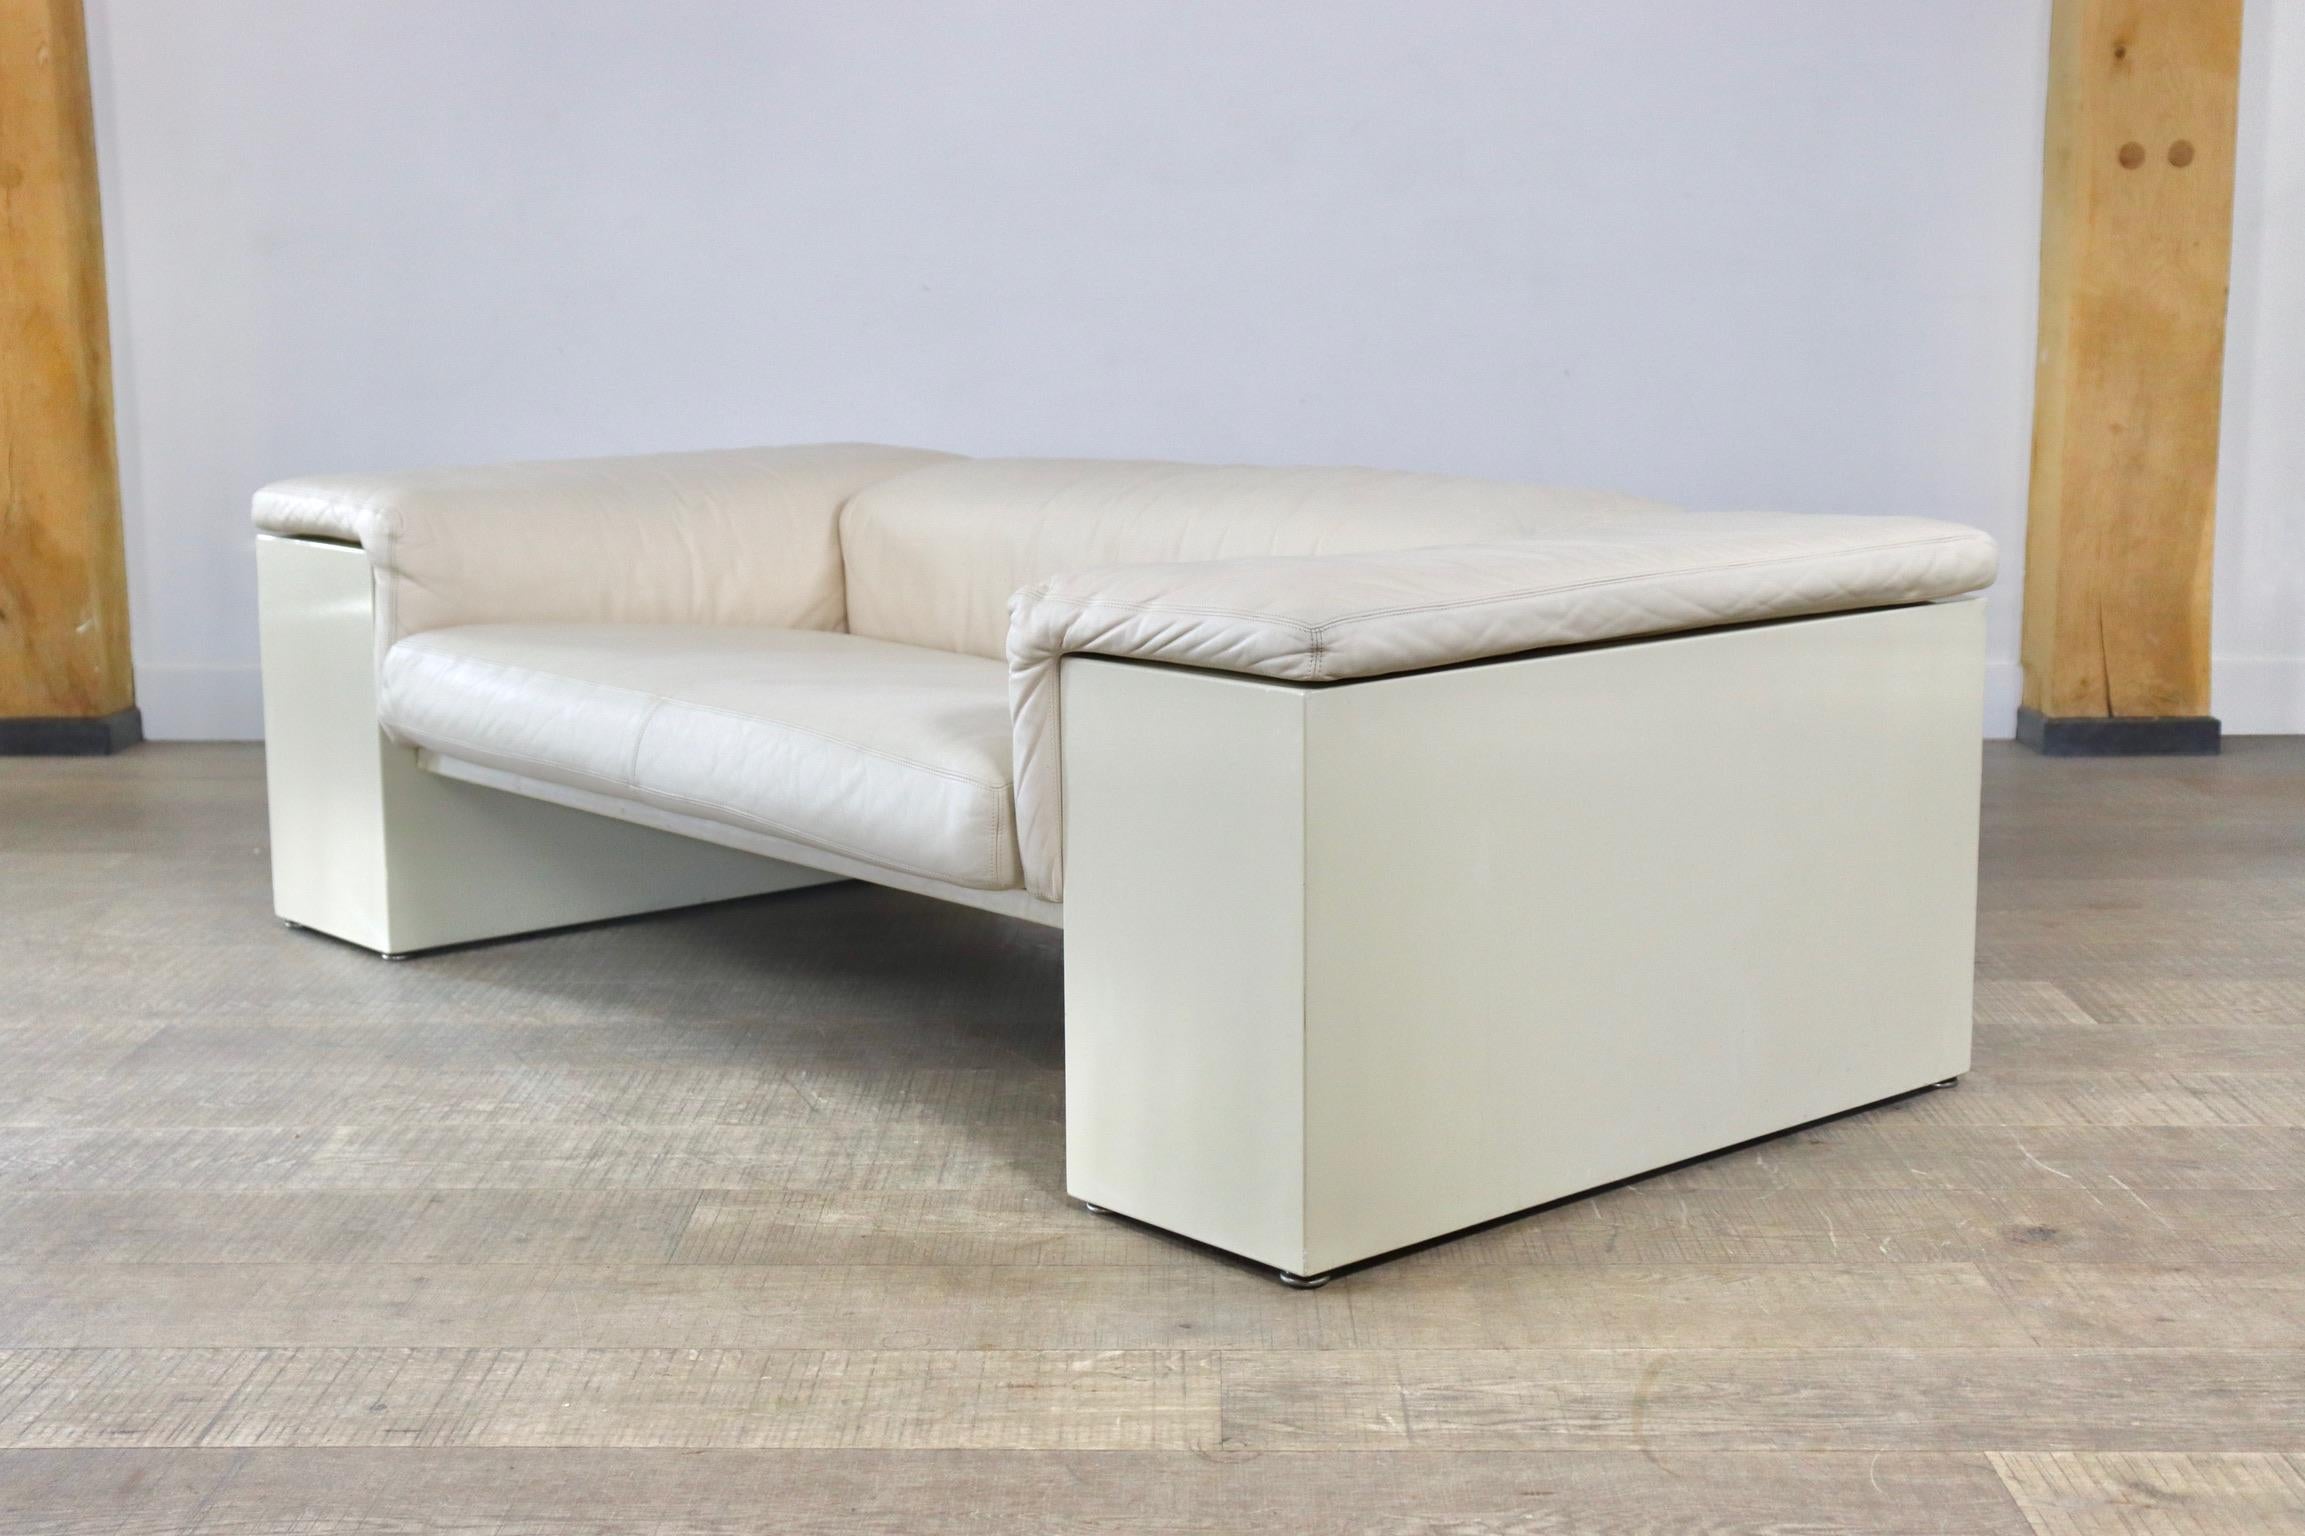 Stunning architectonic 'Brigadier' sofa by Cini Boeri for Gavina, Italy 1973. Nice minimalistic square design in the Highest quality. Smooth leather in an off white color, same color as the high gloss lacquered wooden blocks. Unique piece, really